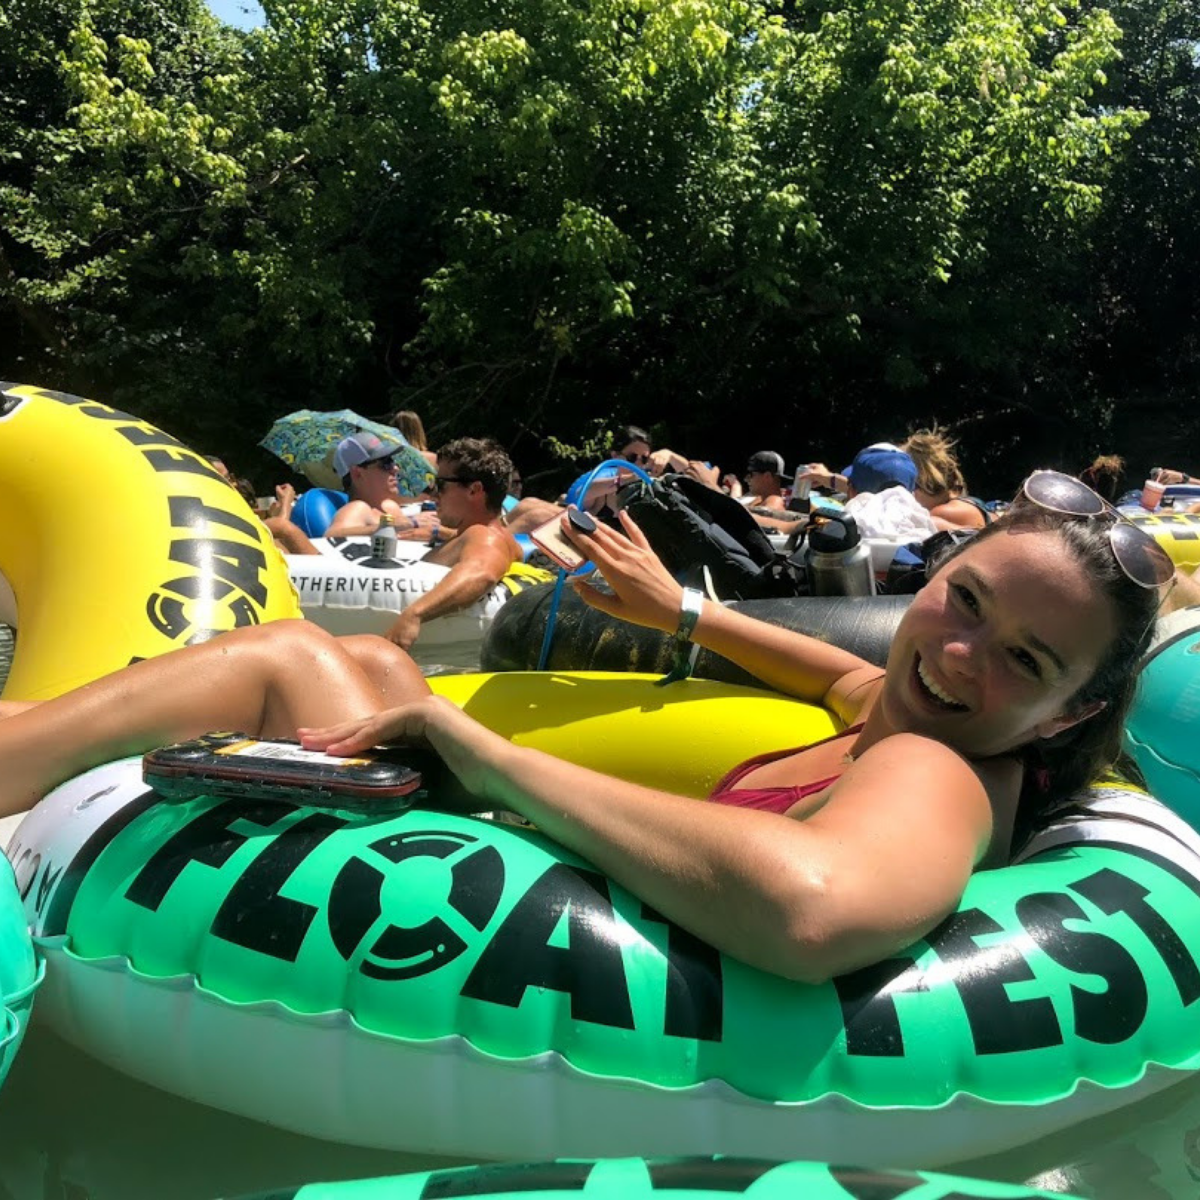 https://www.agirlfromtx.com/wp-content/uploads/2018/07/A-Girl-From-TX-Header-float-the-river.png